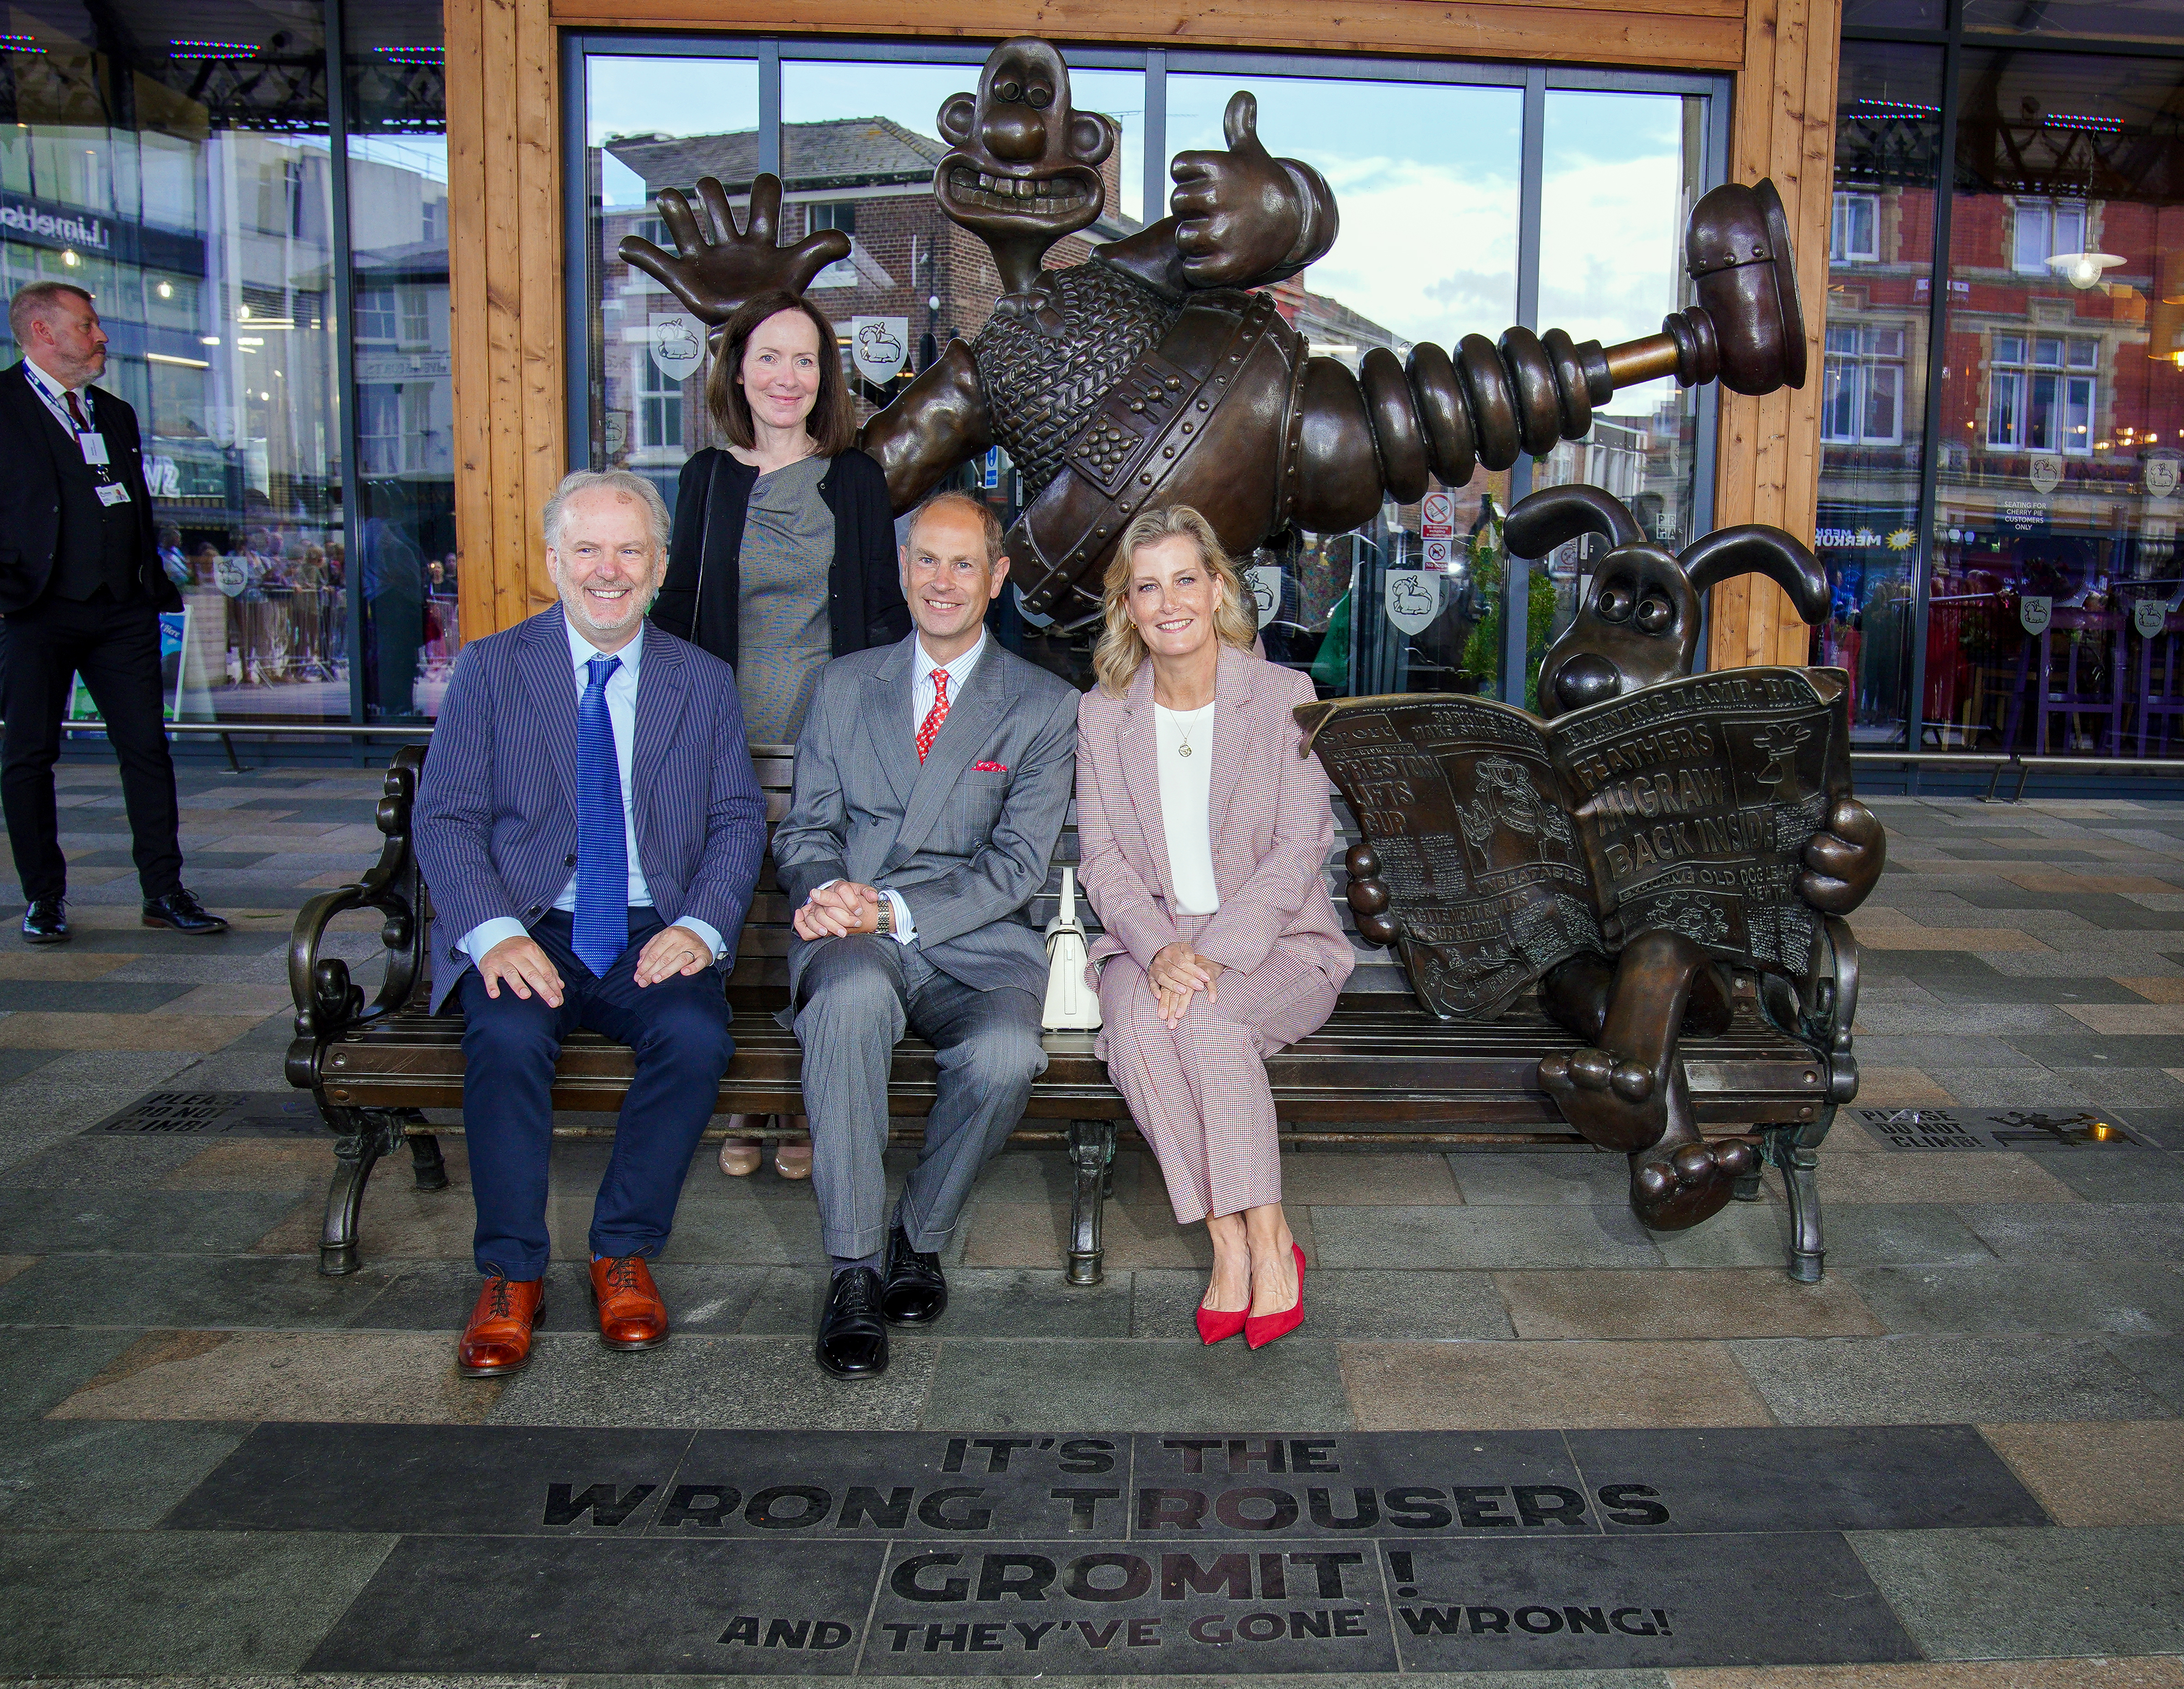 The Earl and Countess of Wessex at the Wallace and Gromit Bench